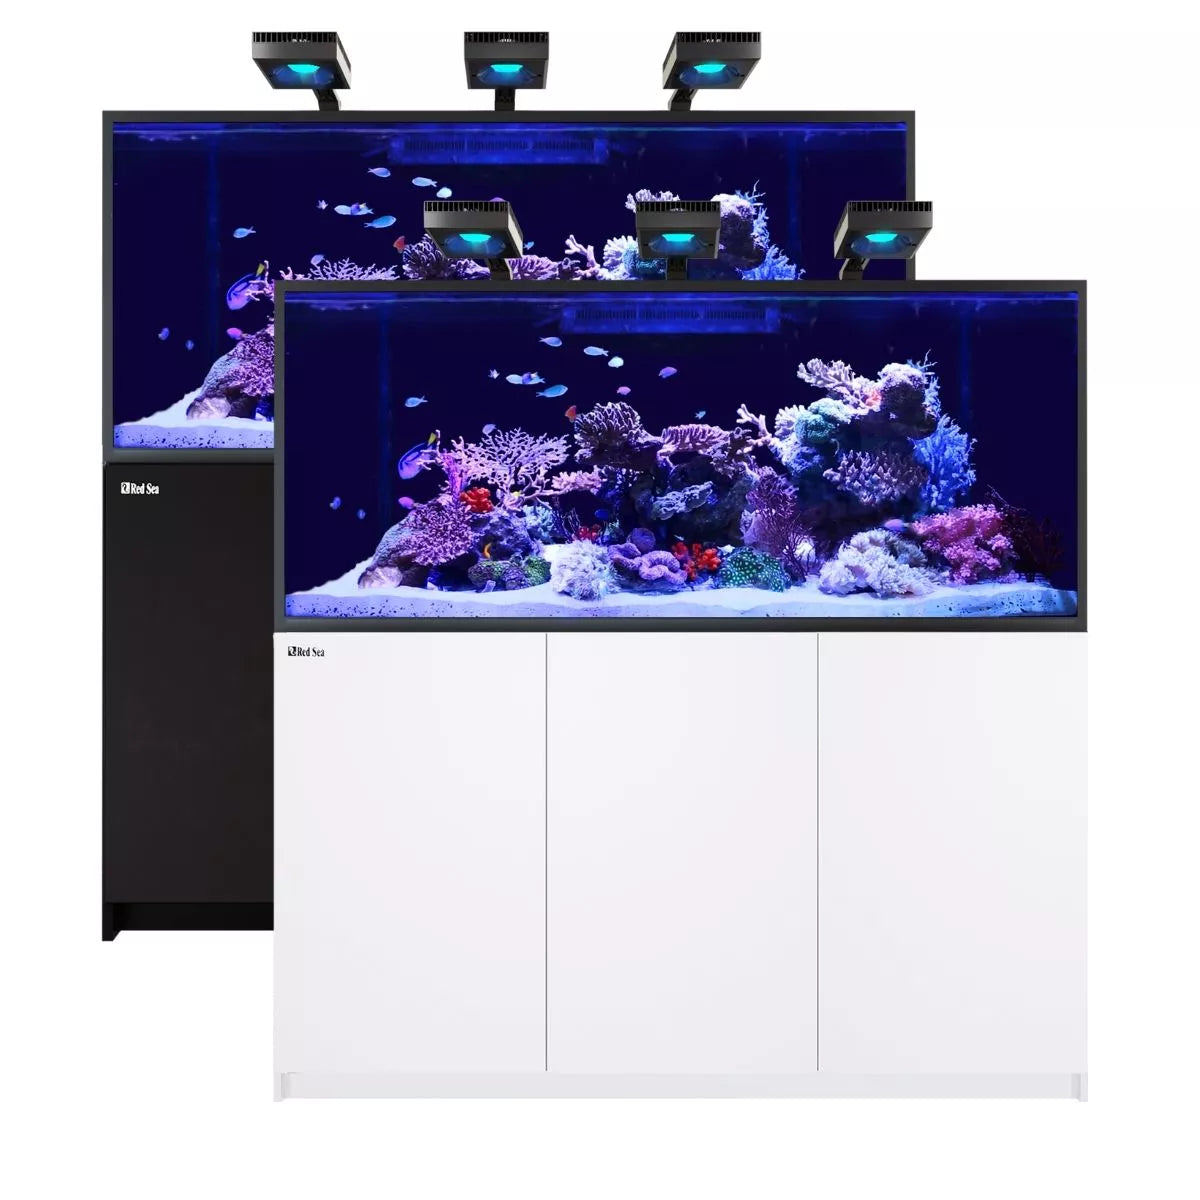 Reefer MAX S-700 G2+ System (149 Gal) - Red Sea